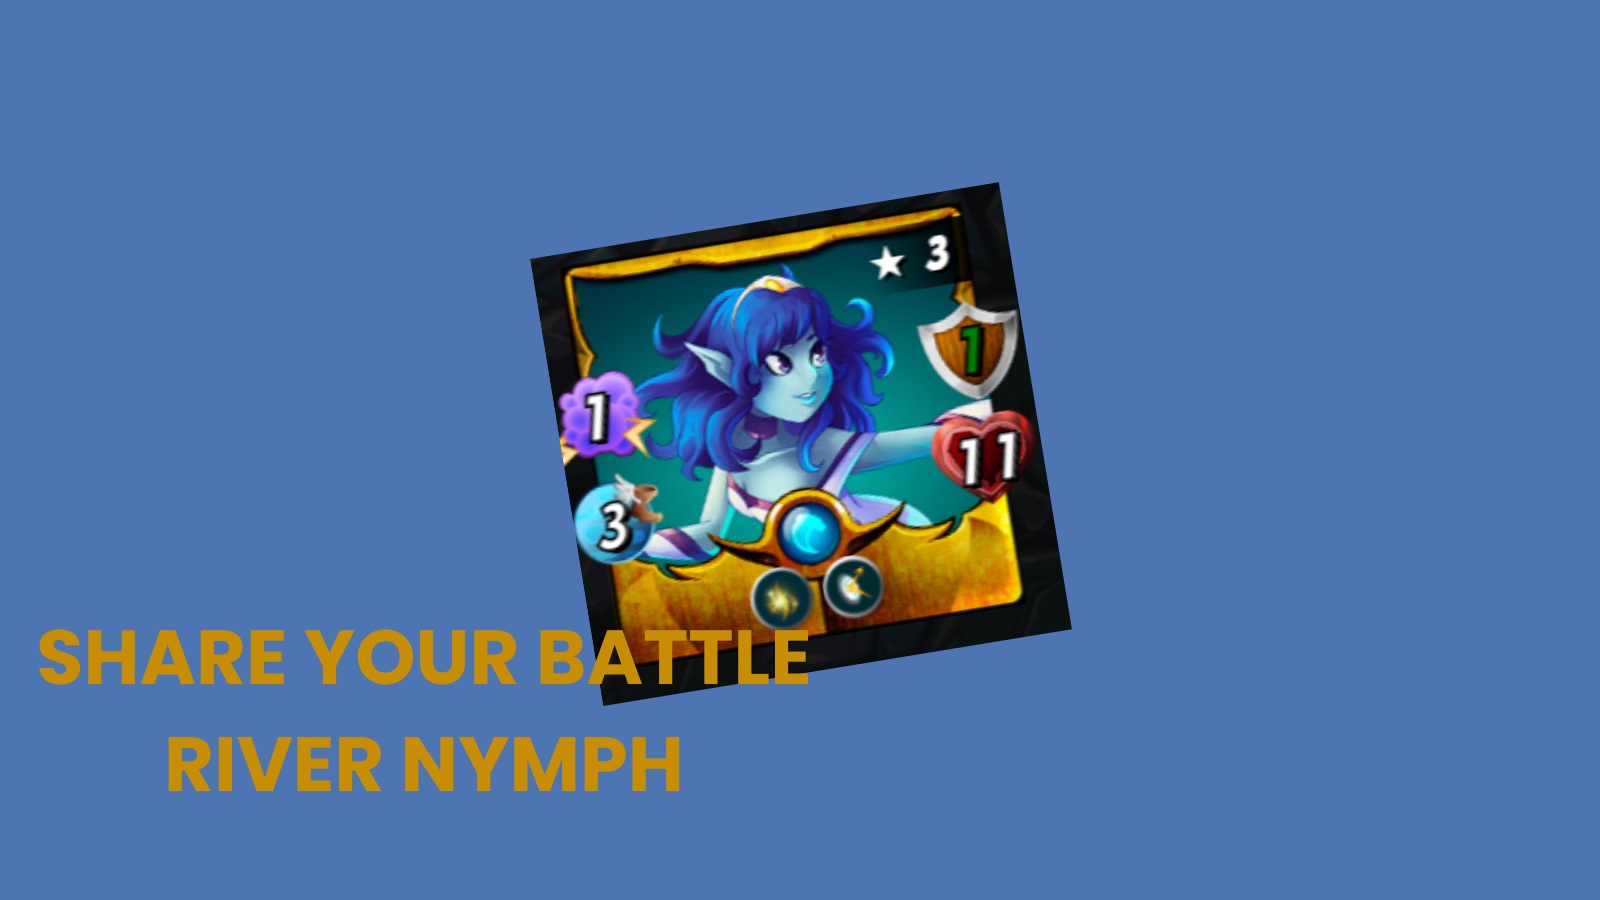 @ijat/share-your-battle-river-nymph